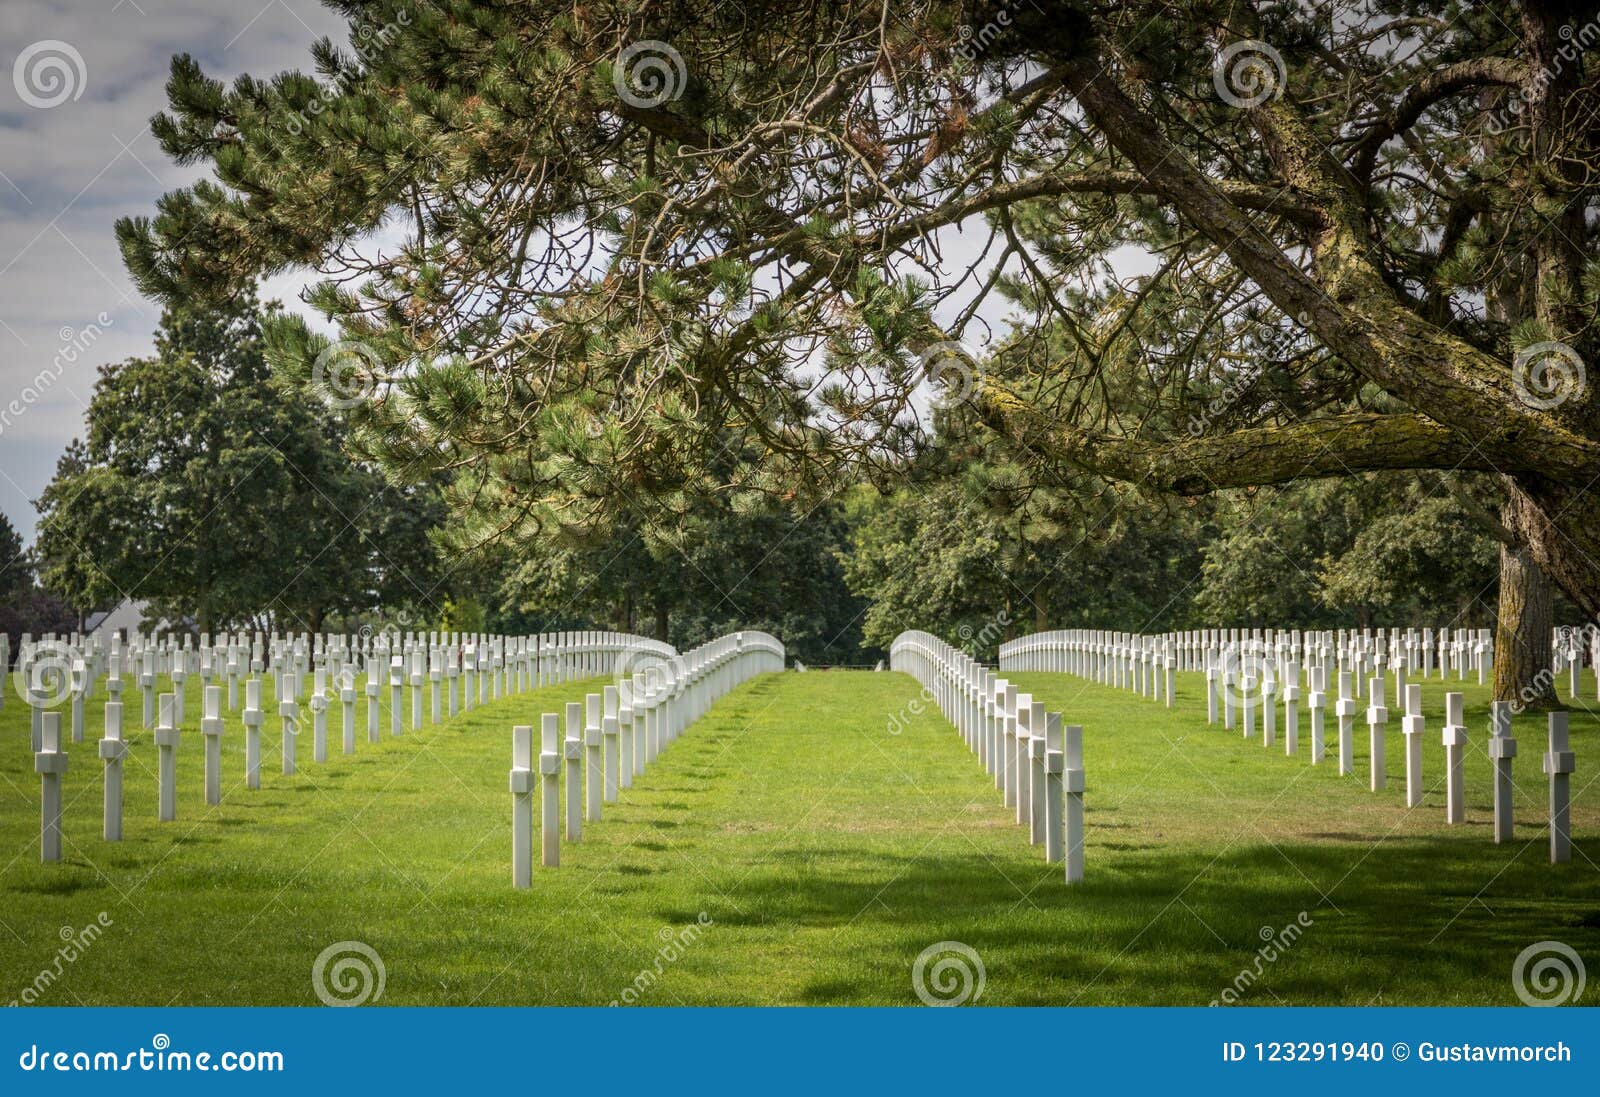 The Normandy American Cemetery At Omaha Beach Normandy